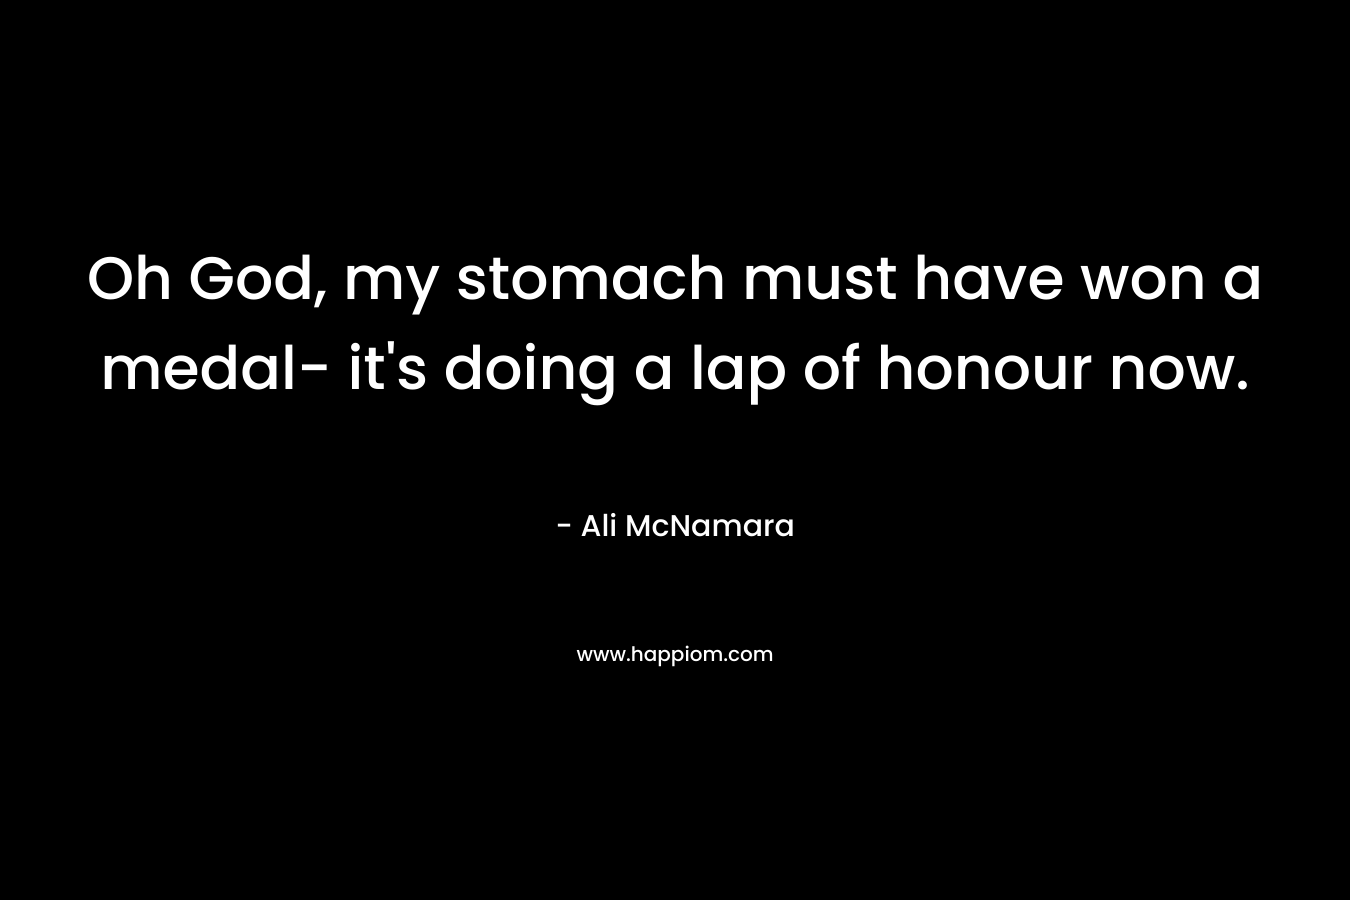 Oh God, my stomach must have won a medal- it’s doing a lap of honour now. – Ali McNamara